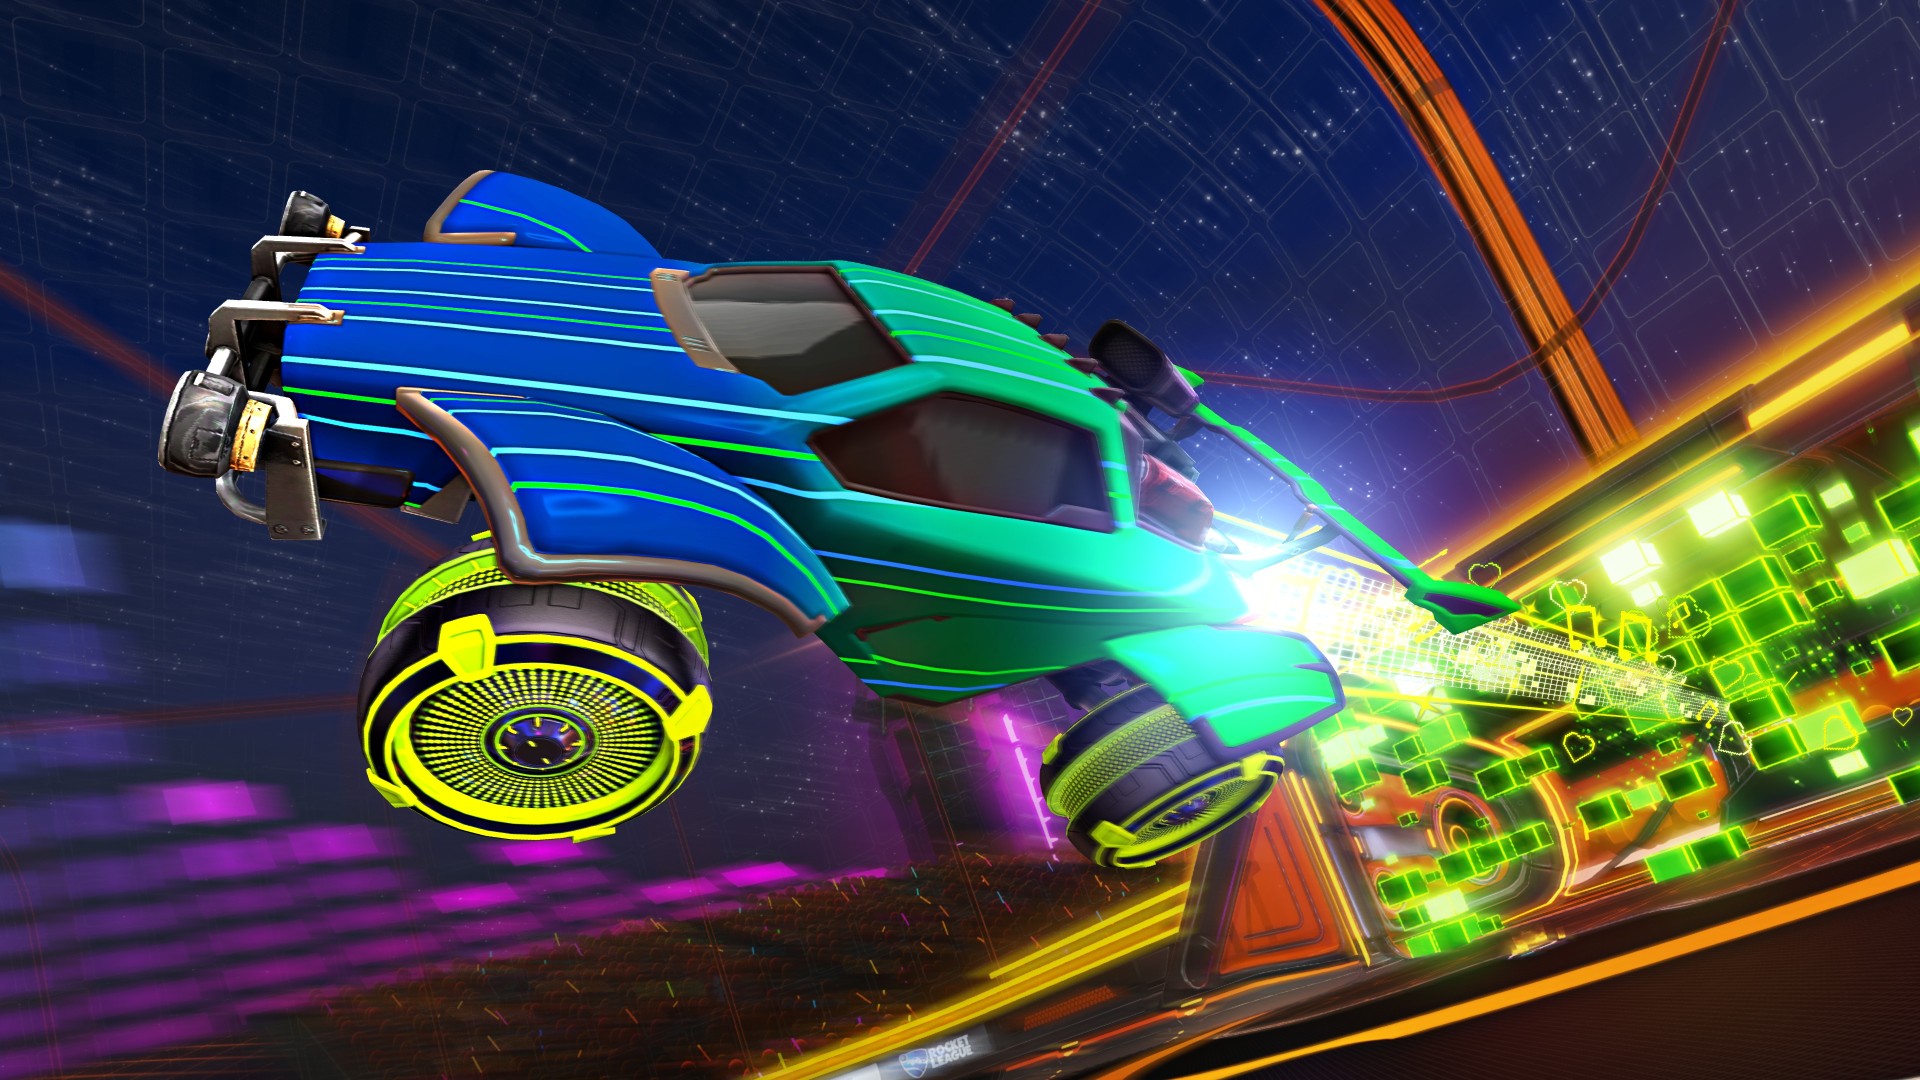 Season 2 Drops December 9 In Rocket League With Xbox Series X S Optimizations Renewednotions